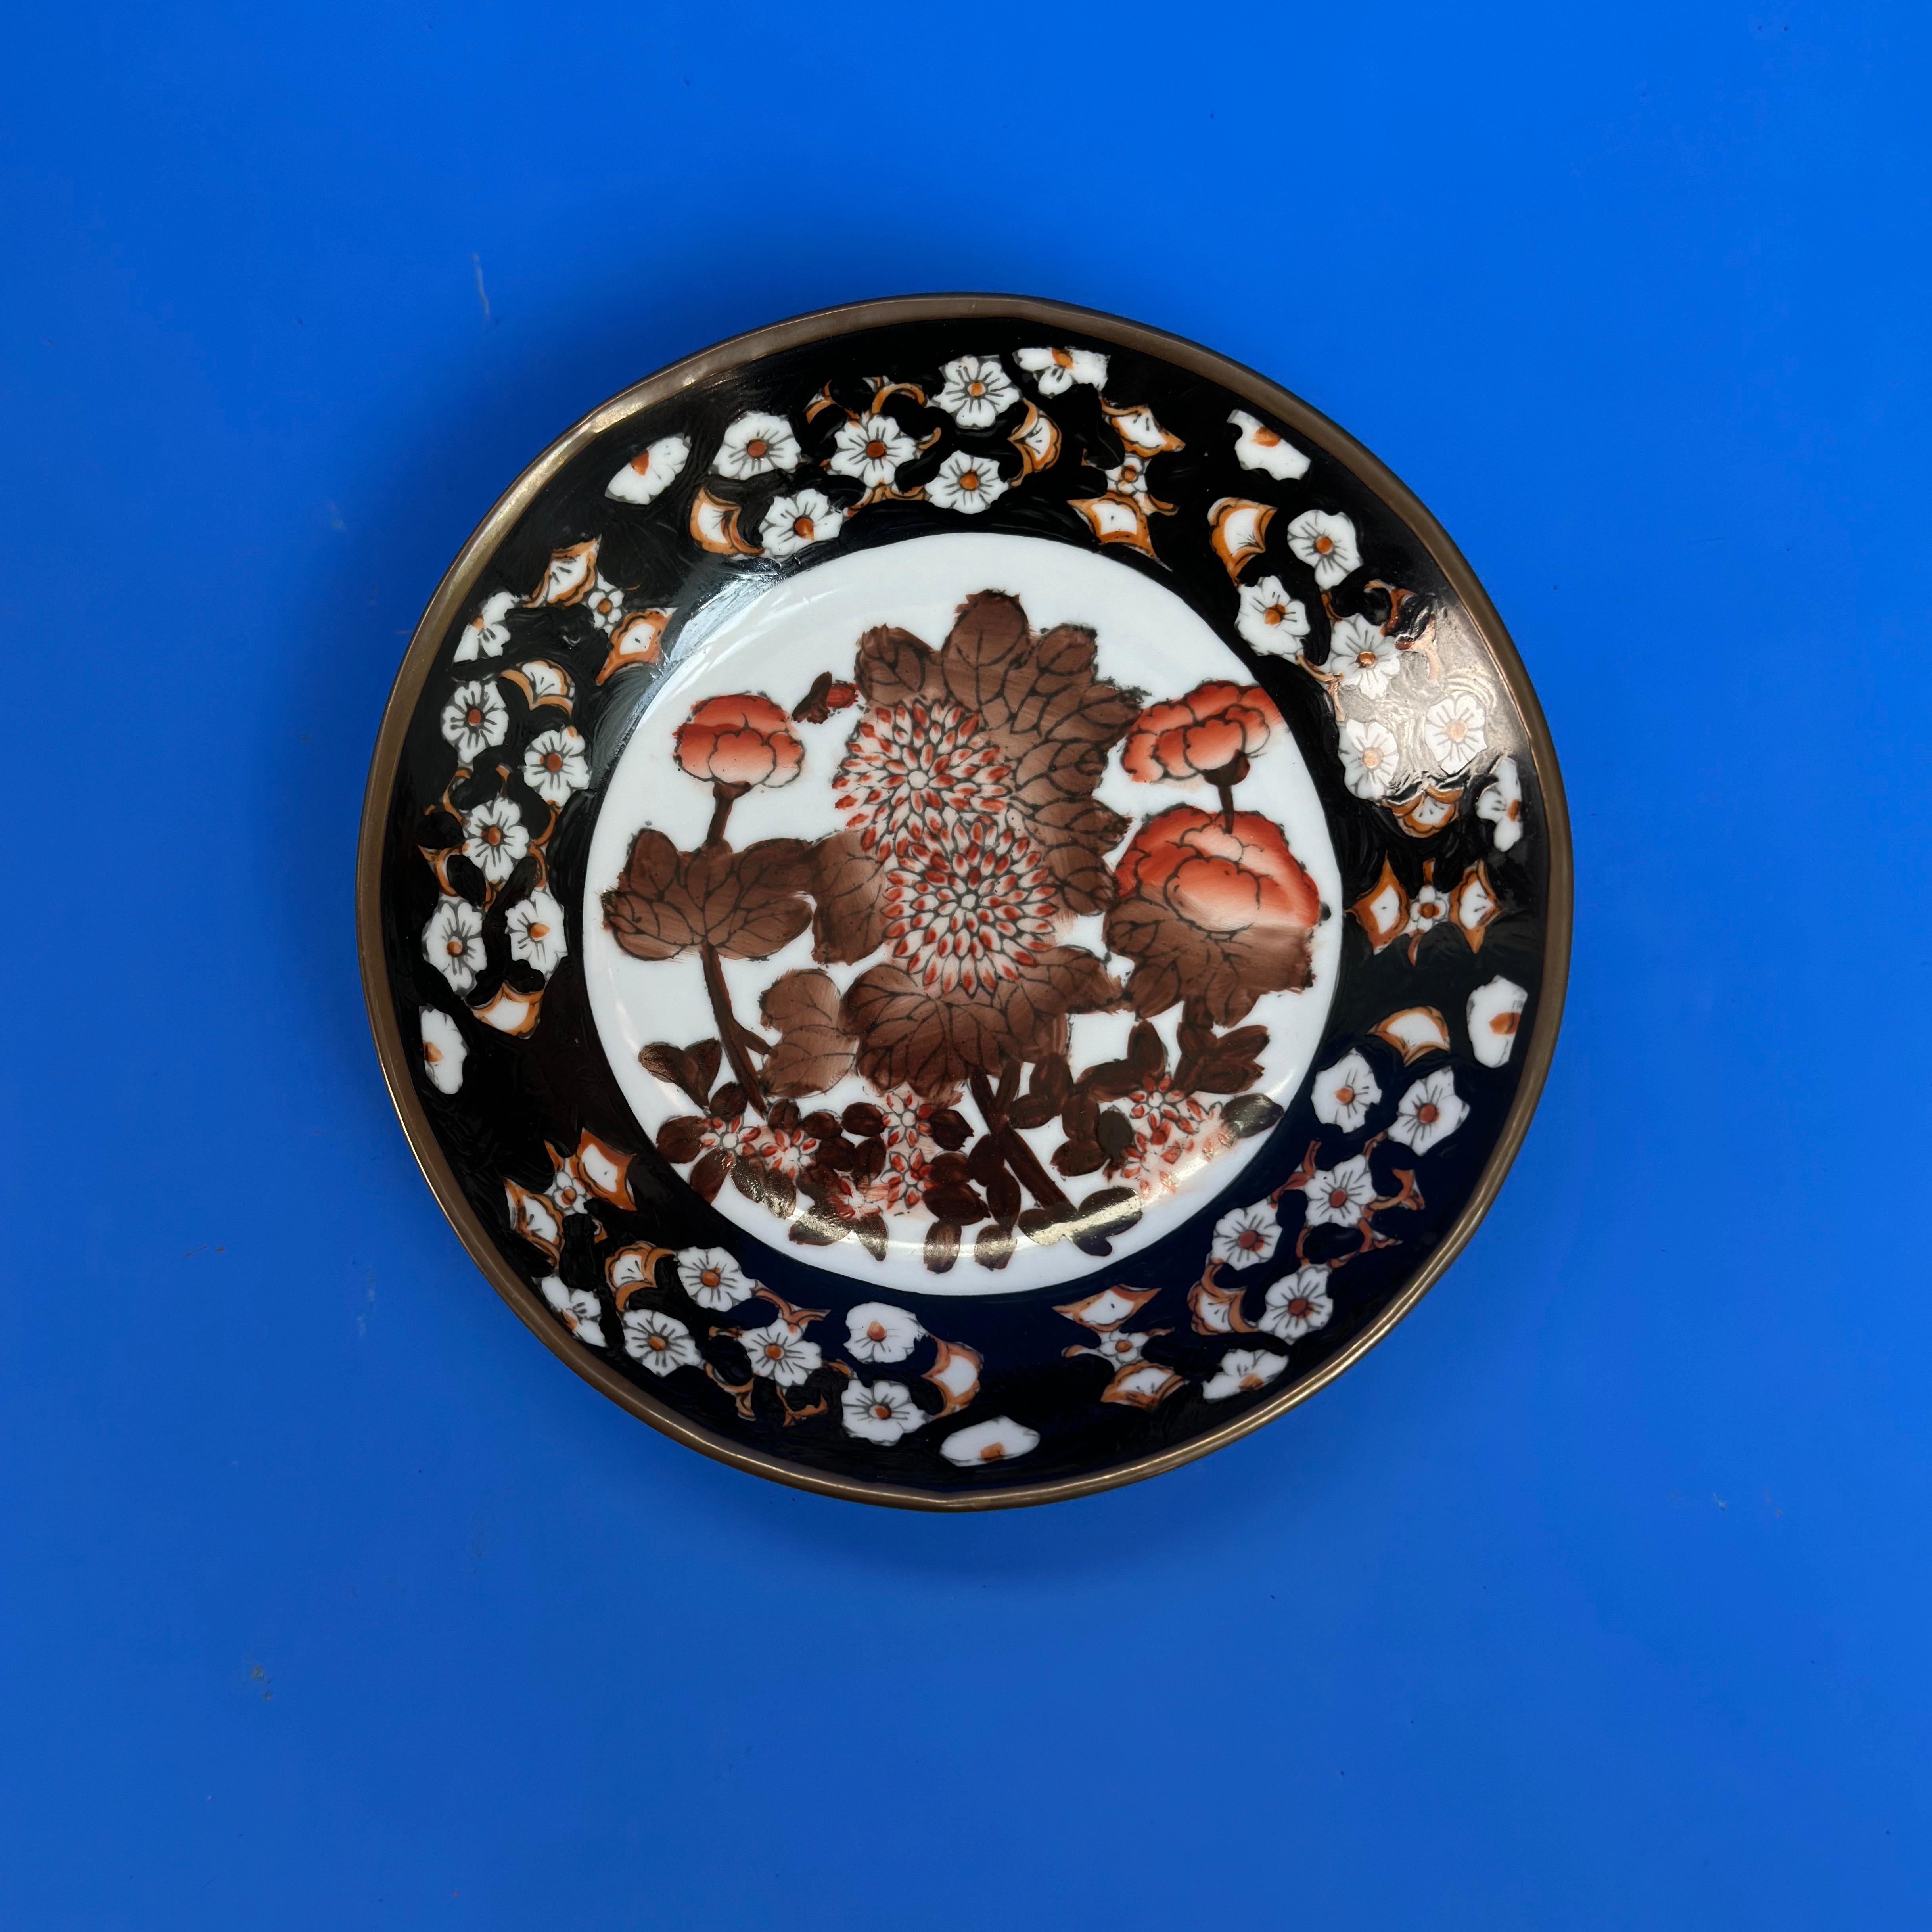 Vintage Decorative Wall Plate

A Japanese vintage porcelain wall plate, handcrafted in the 1970s, features an eye-catching pattern of brown and red florals framed by a bold black border. Crafted in Japan and adorned in China, it bears the 'ACF'